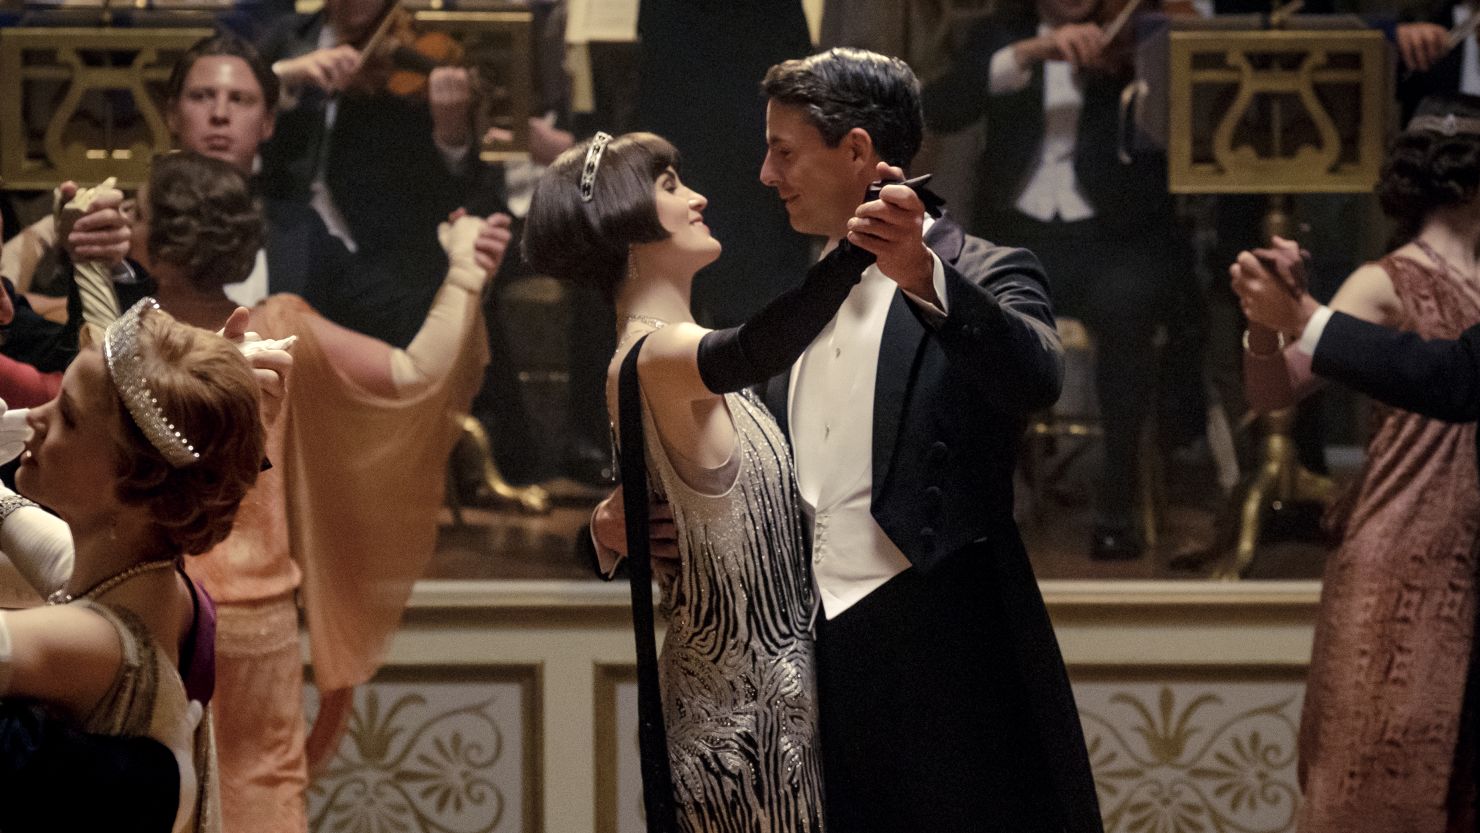 Michelle Dockery and Matthew Goode in the "Downton Abbey" movie. A sequel to the film debuts in March.